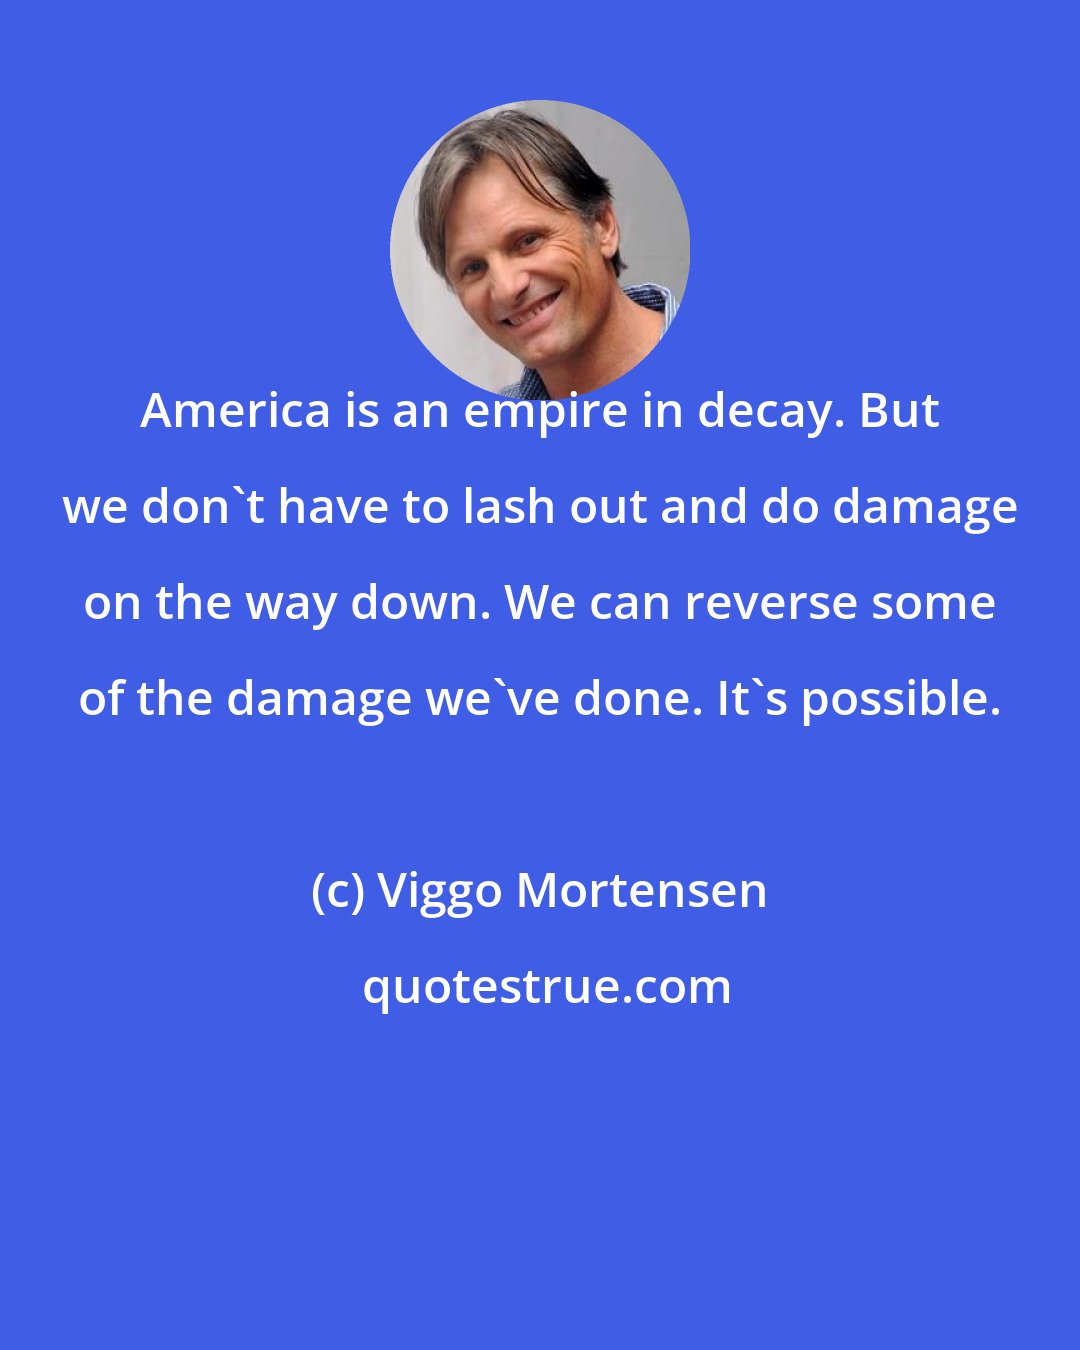 Viggo Mortensen: America is an empire in decay. But we don't have to lash out and do damage on the way down. We can reverse some of the damage we've done. It's possible.